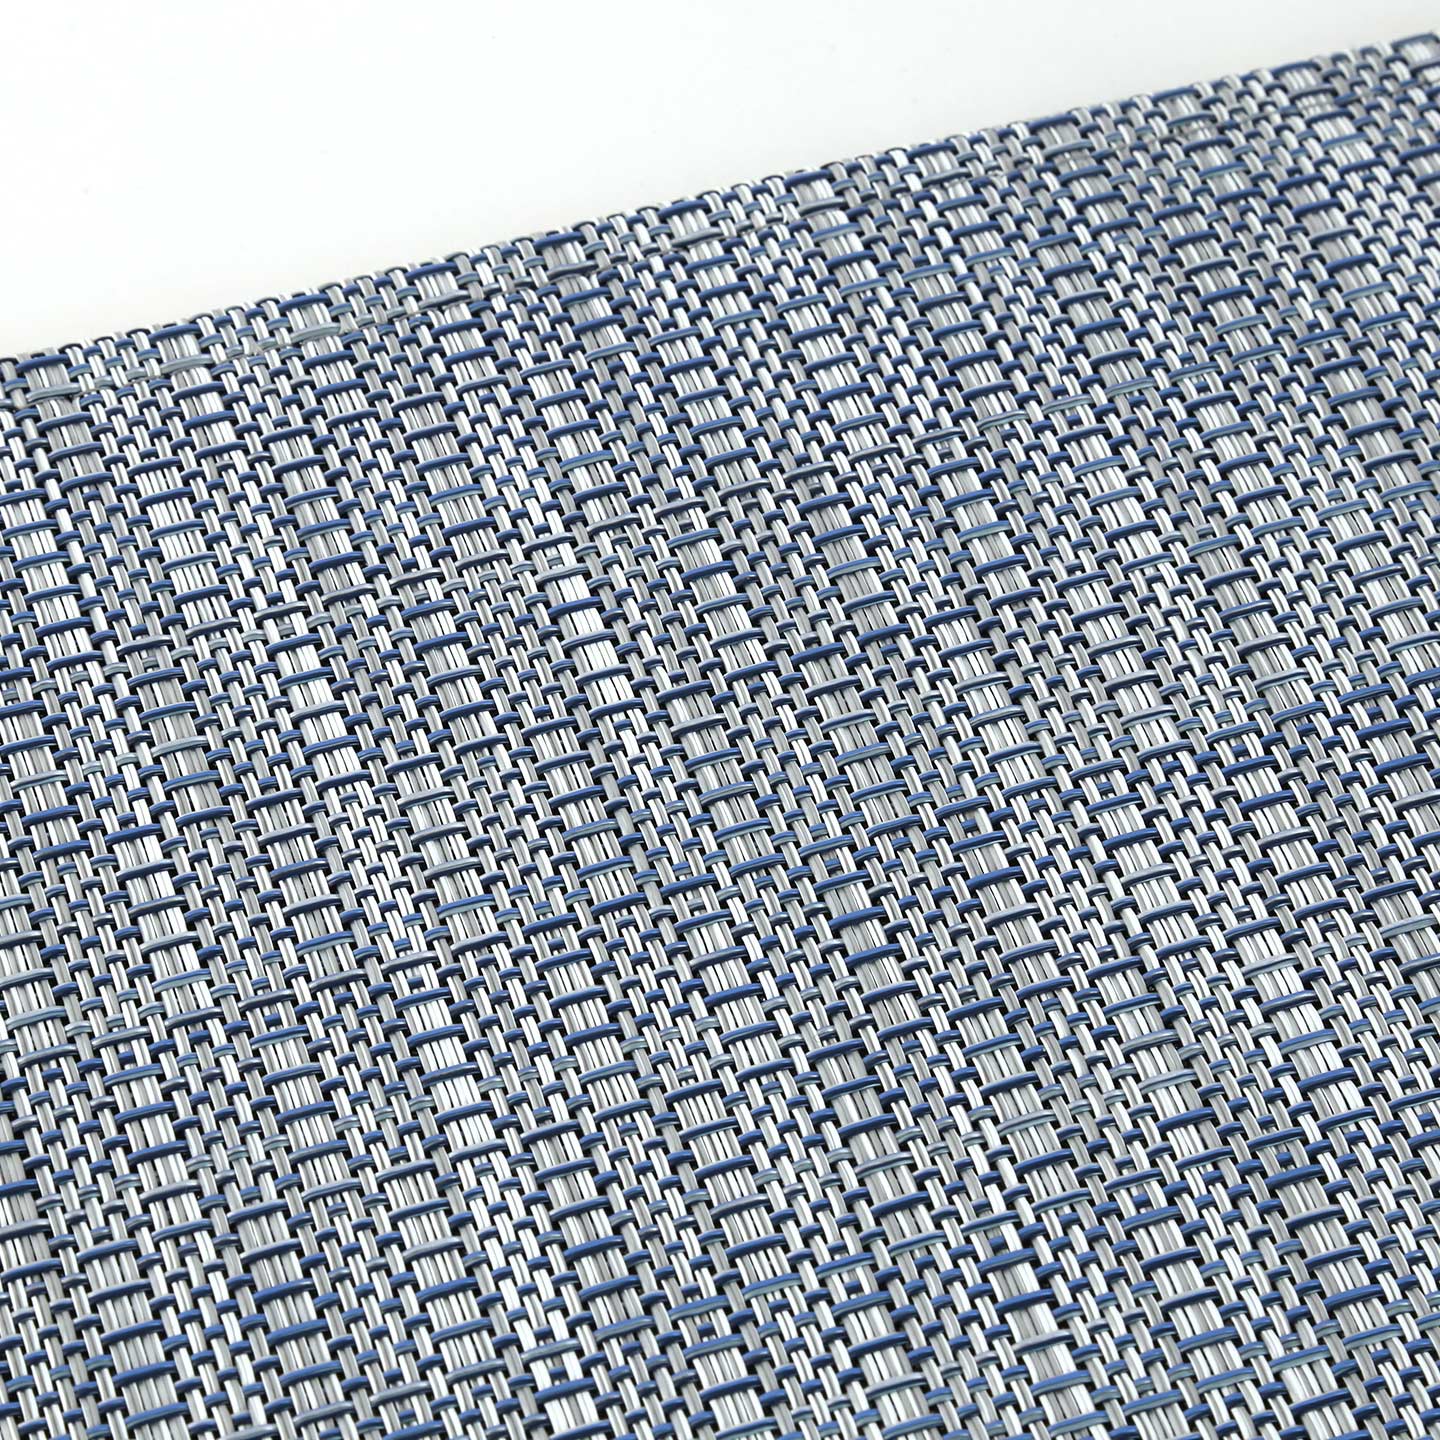 Thatch Woven Floor Mat - Pewter 46 x 72 - Chilewich